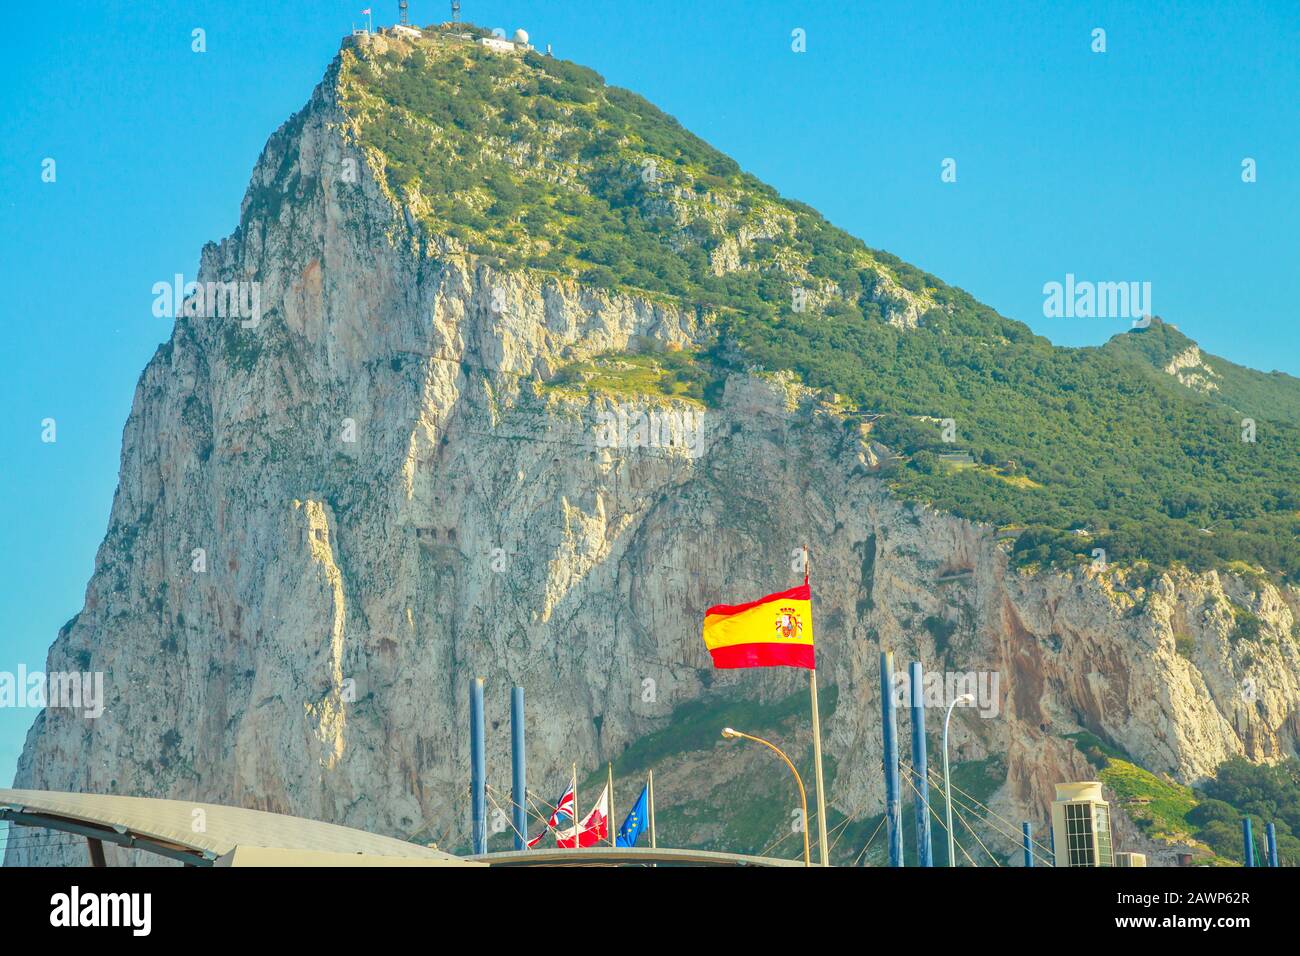 The Gibraltar border, between Spain and England, bay view from Spanish territory in Spain. Flags of Europe, Spain, and the United Kingdom together. Stock Photo